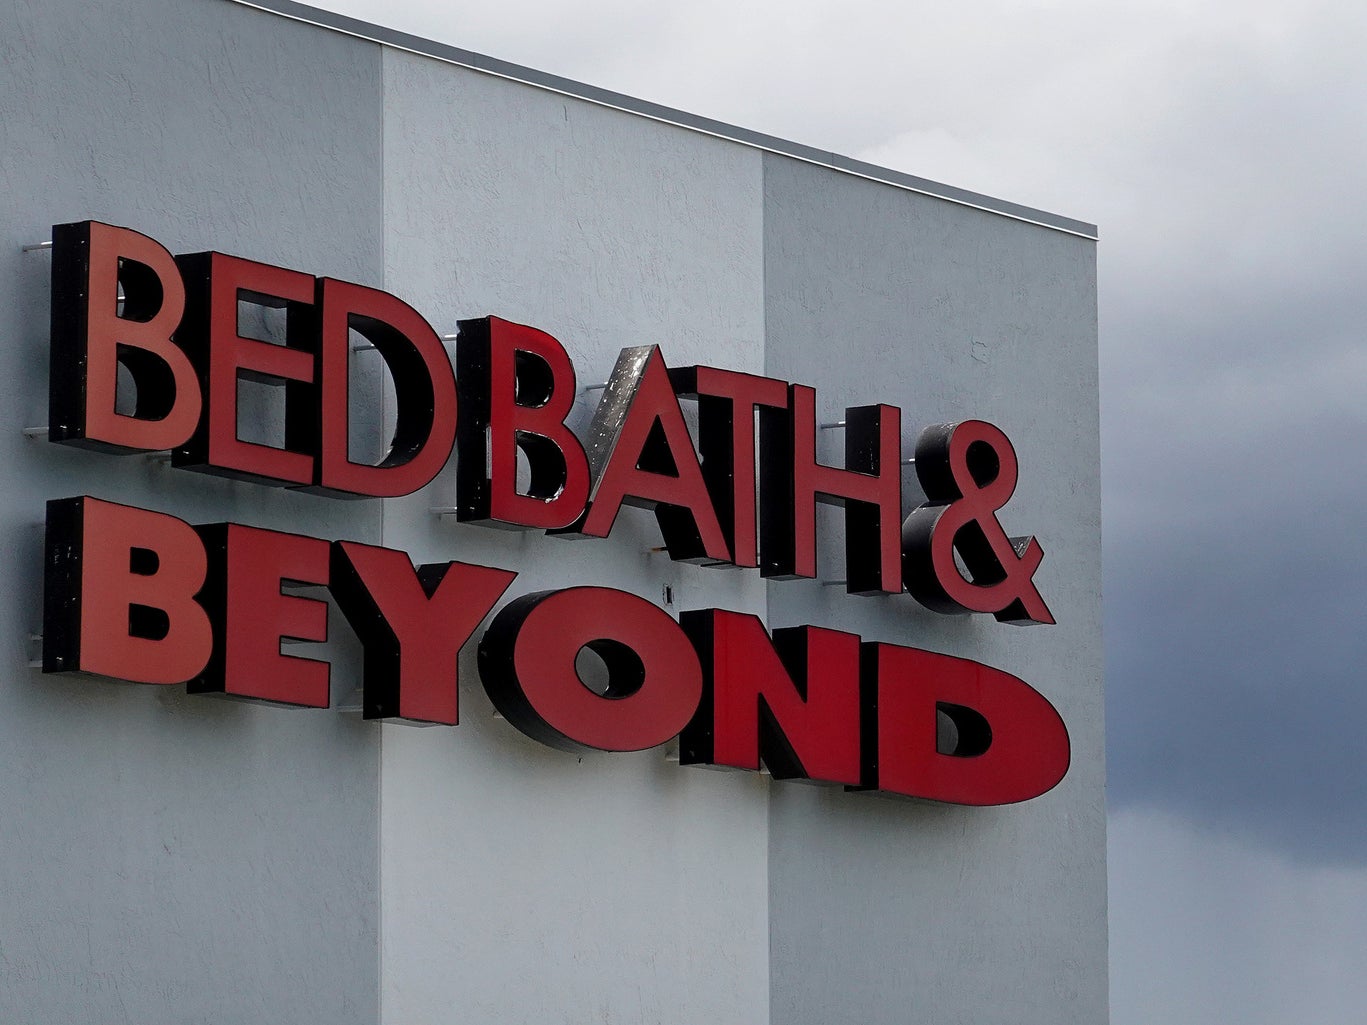 Bed Bath Beyond stock is soaring again